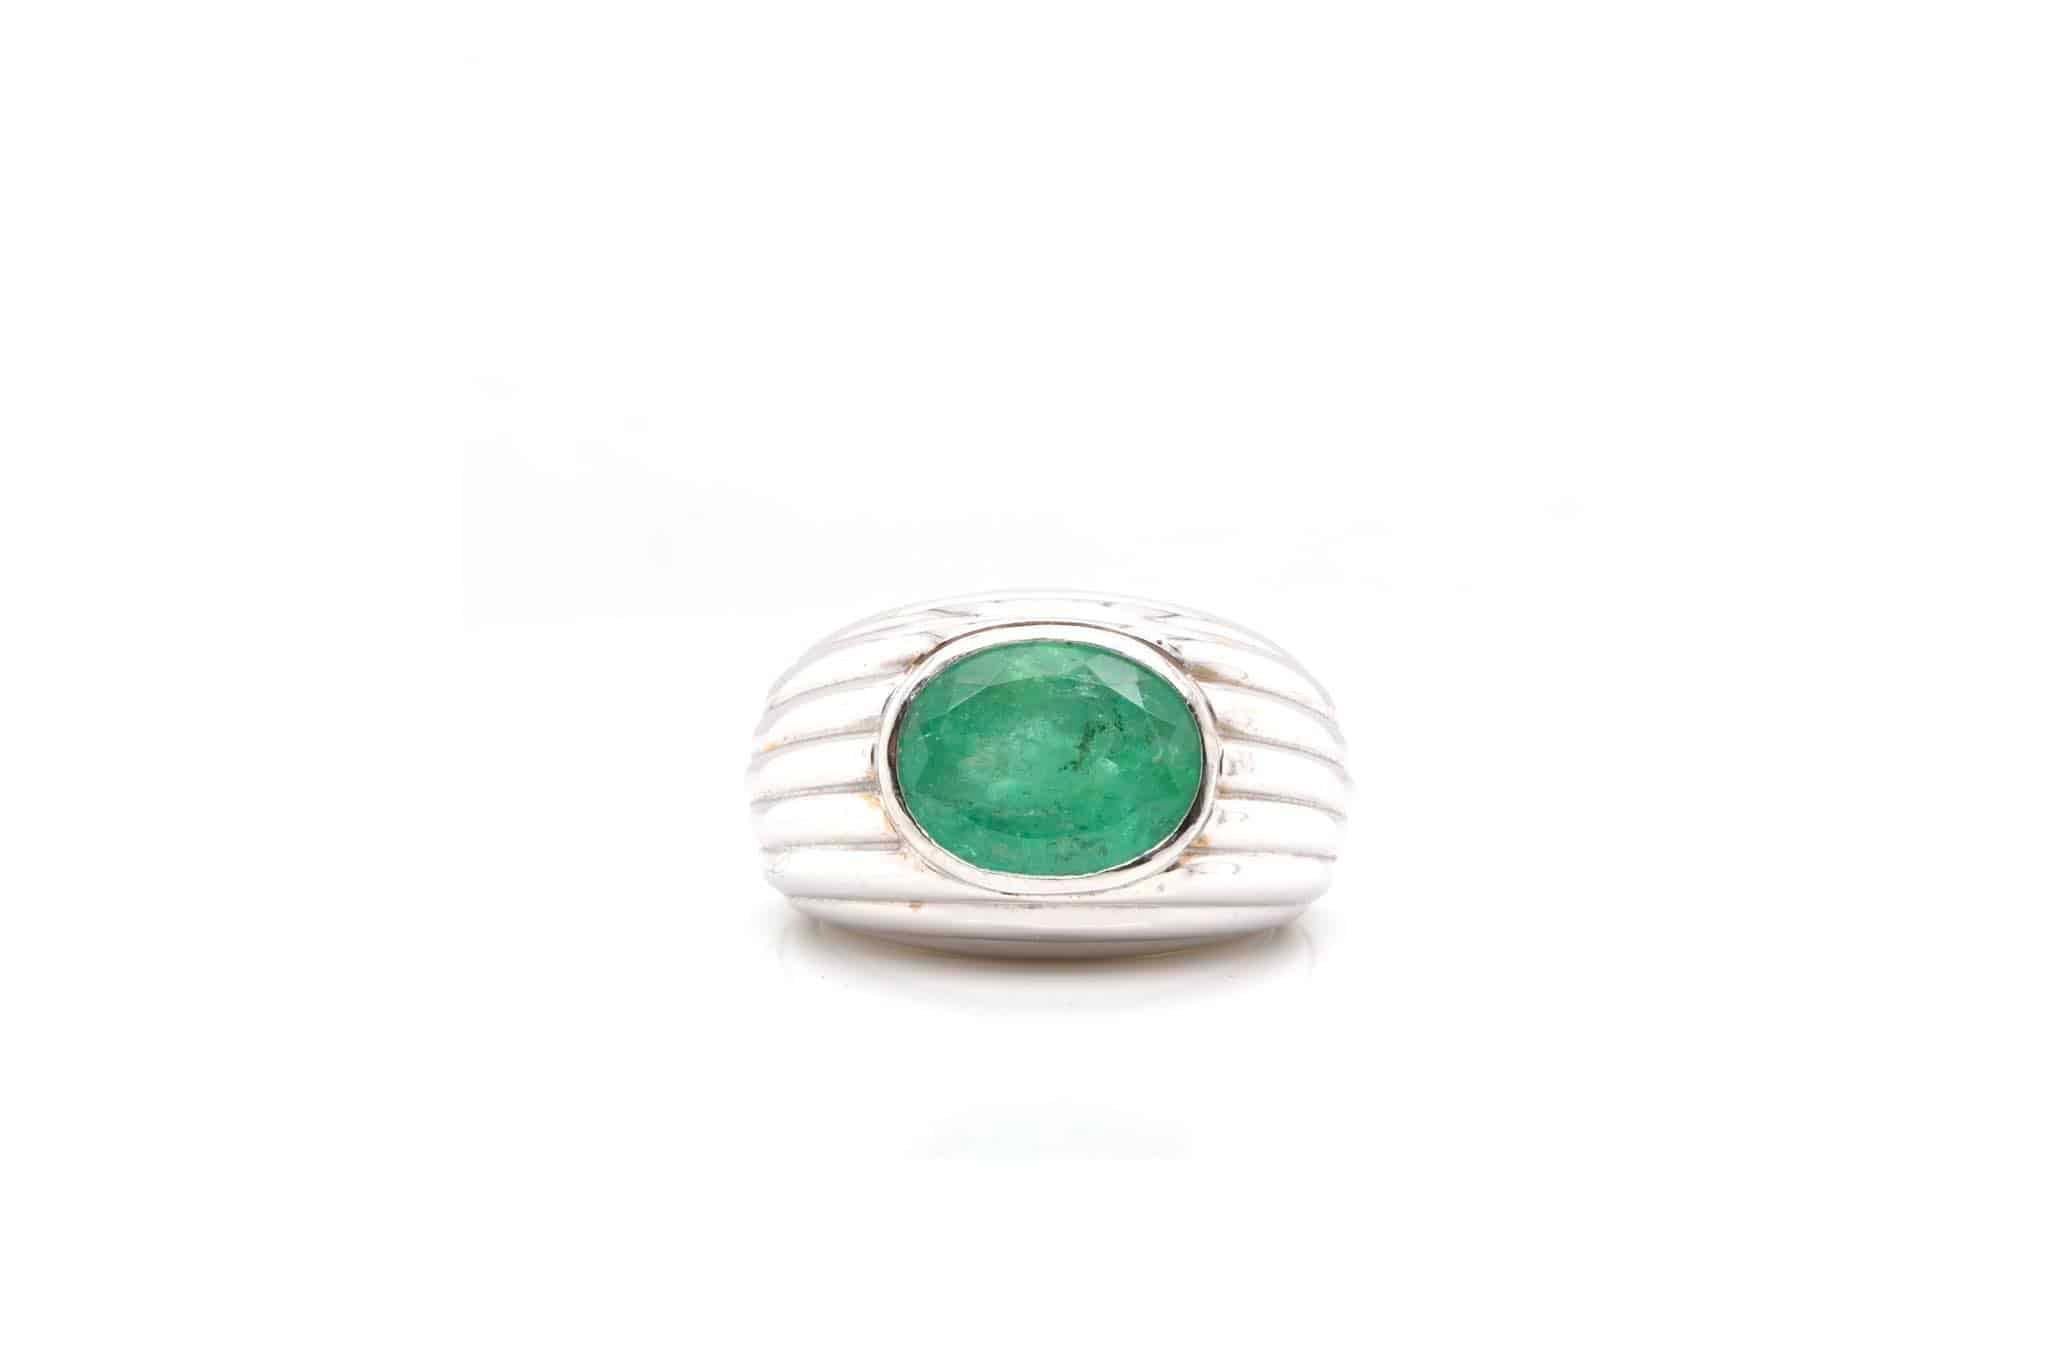 Stones: Emerald cabochon of 7 cts
Material: 18k white gold
Weight: 21.8g
Period: 1940
Size: 56 (free sizing)
Certificate
Ref. : 24539